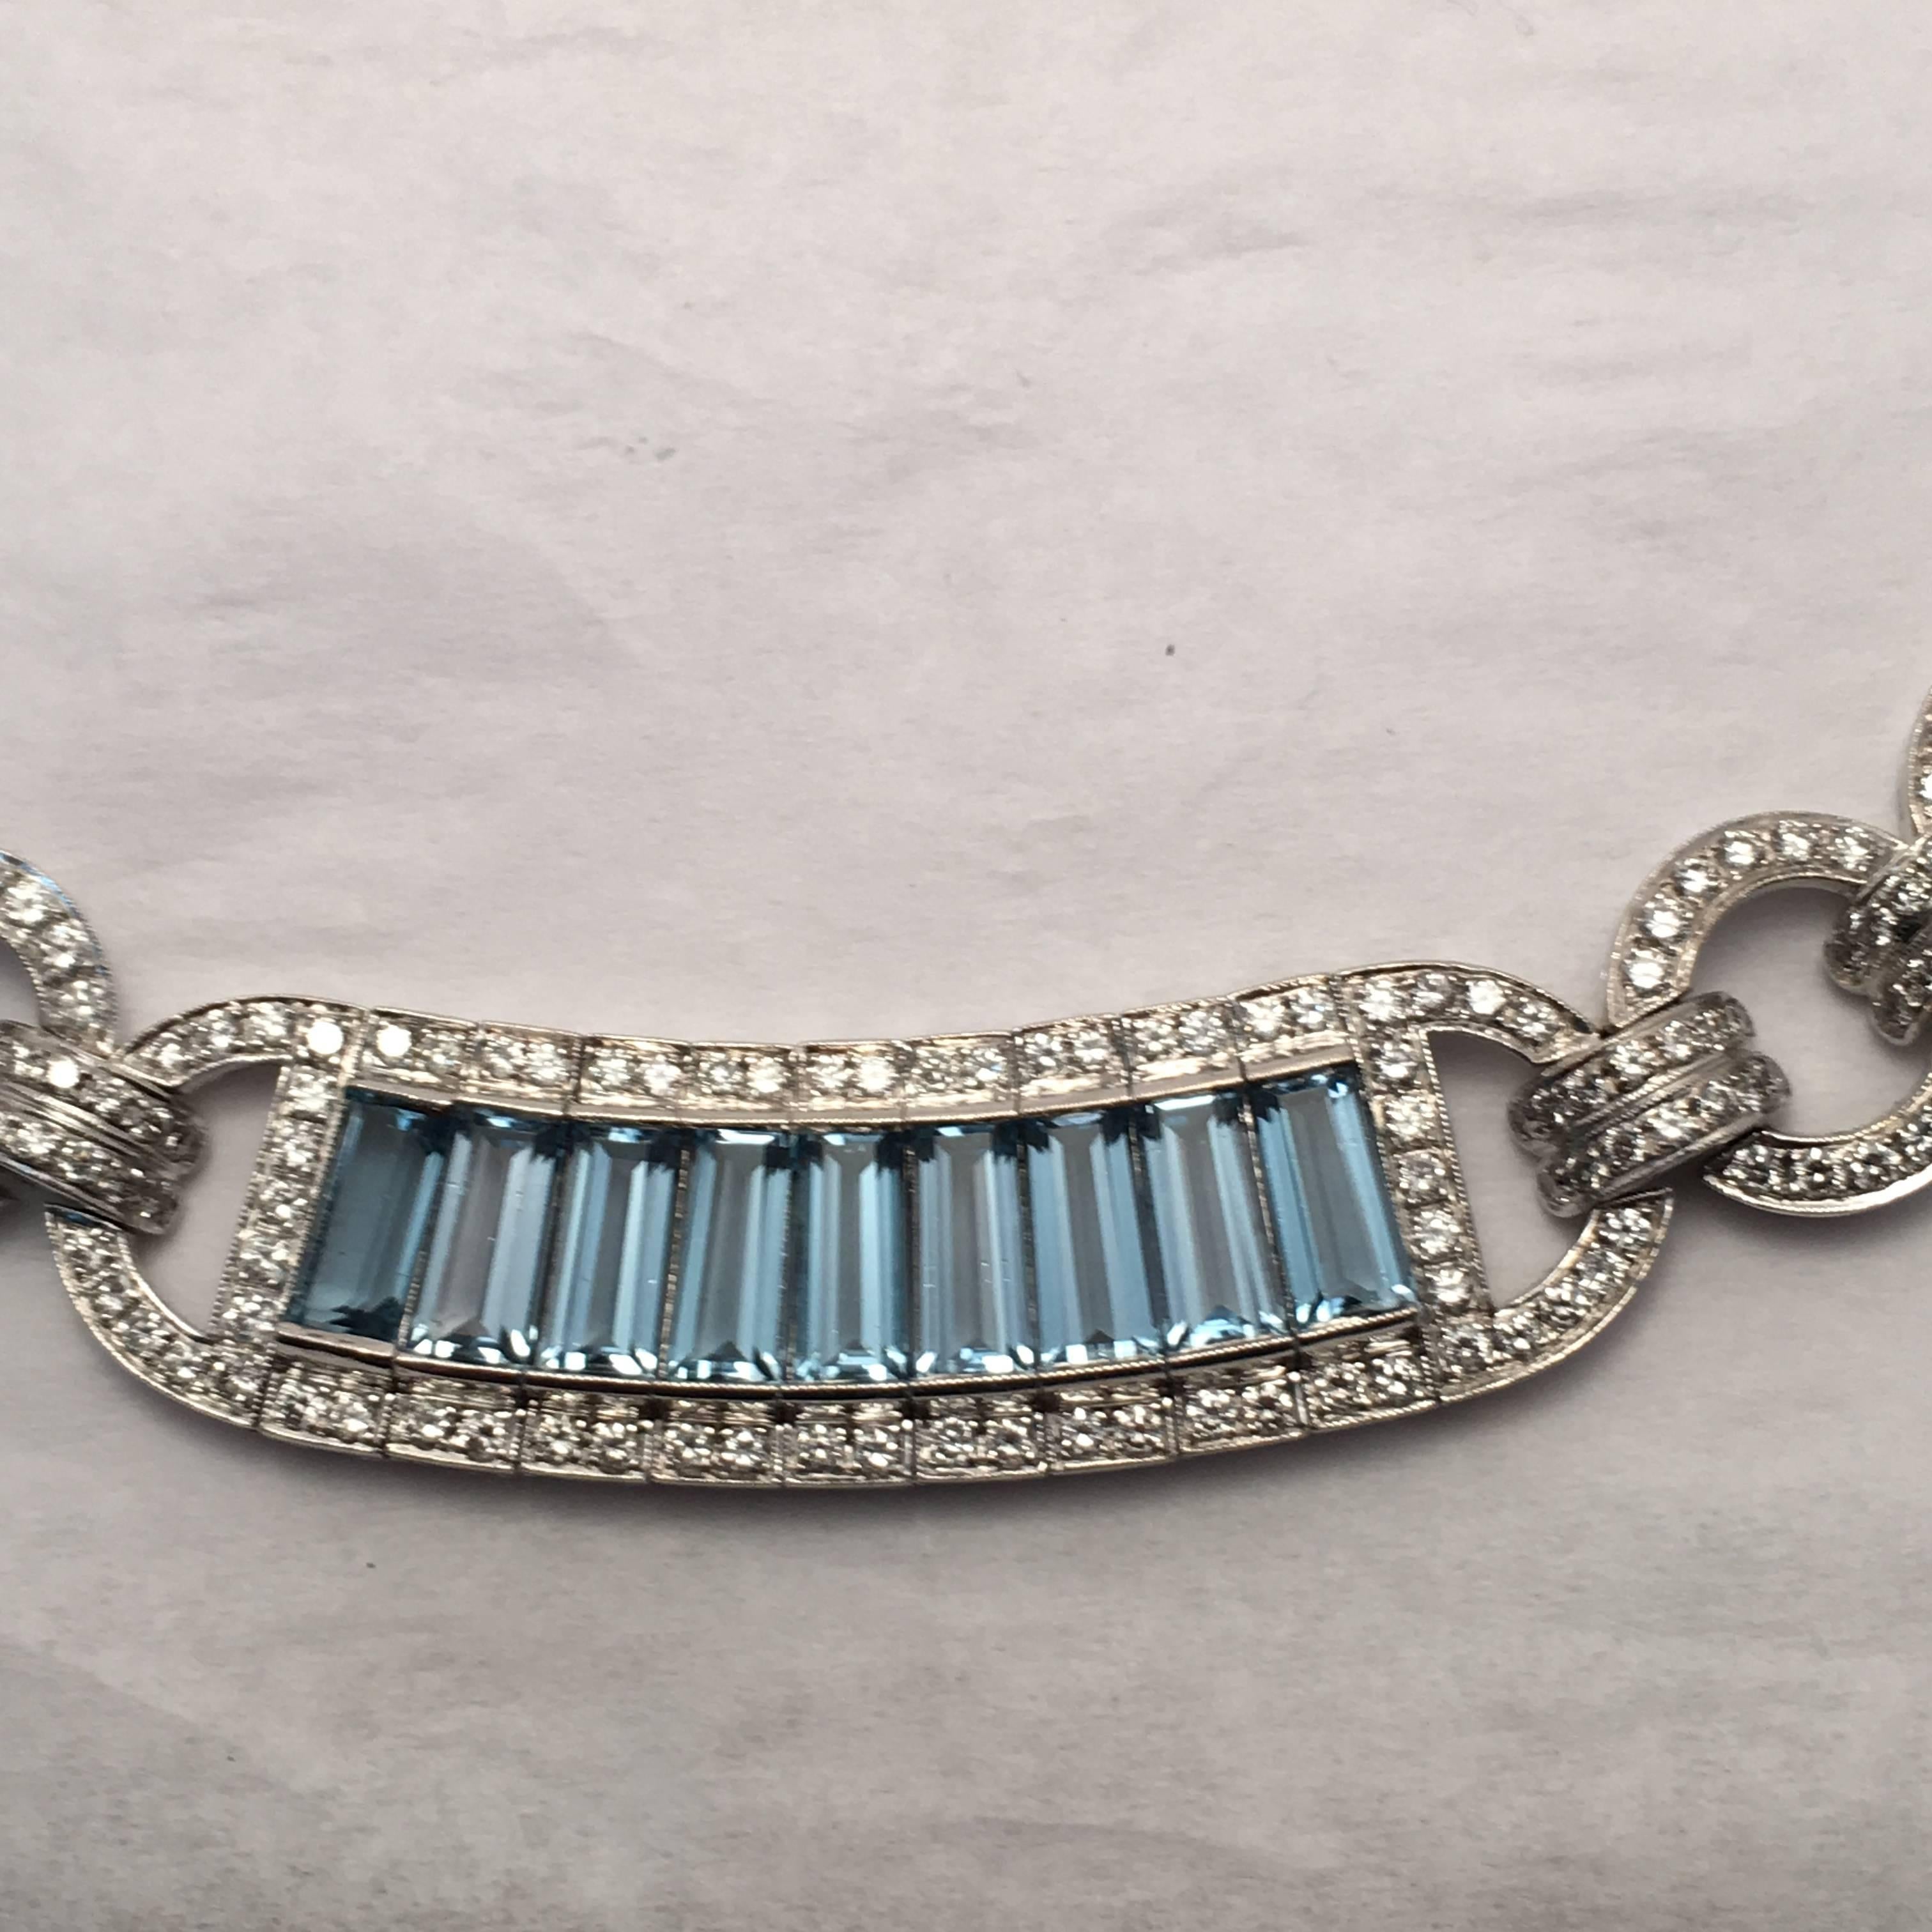 This 18 Kt. white gold necklace consists of 6 sections set with 54 emerald cut blue topaz weighing approximately 49.10 ct. total weight.  Surrounding the blue topaz is a row of round  diamonds around each section numbering 588 and weighing